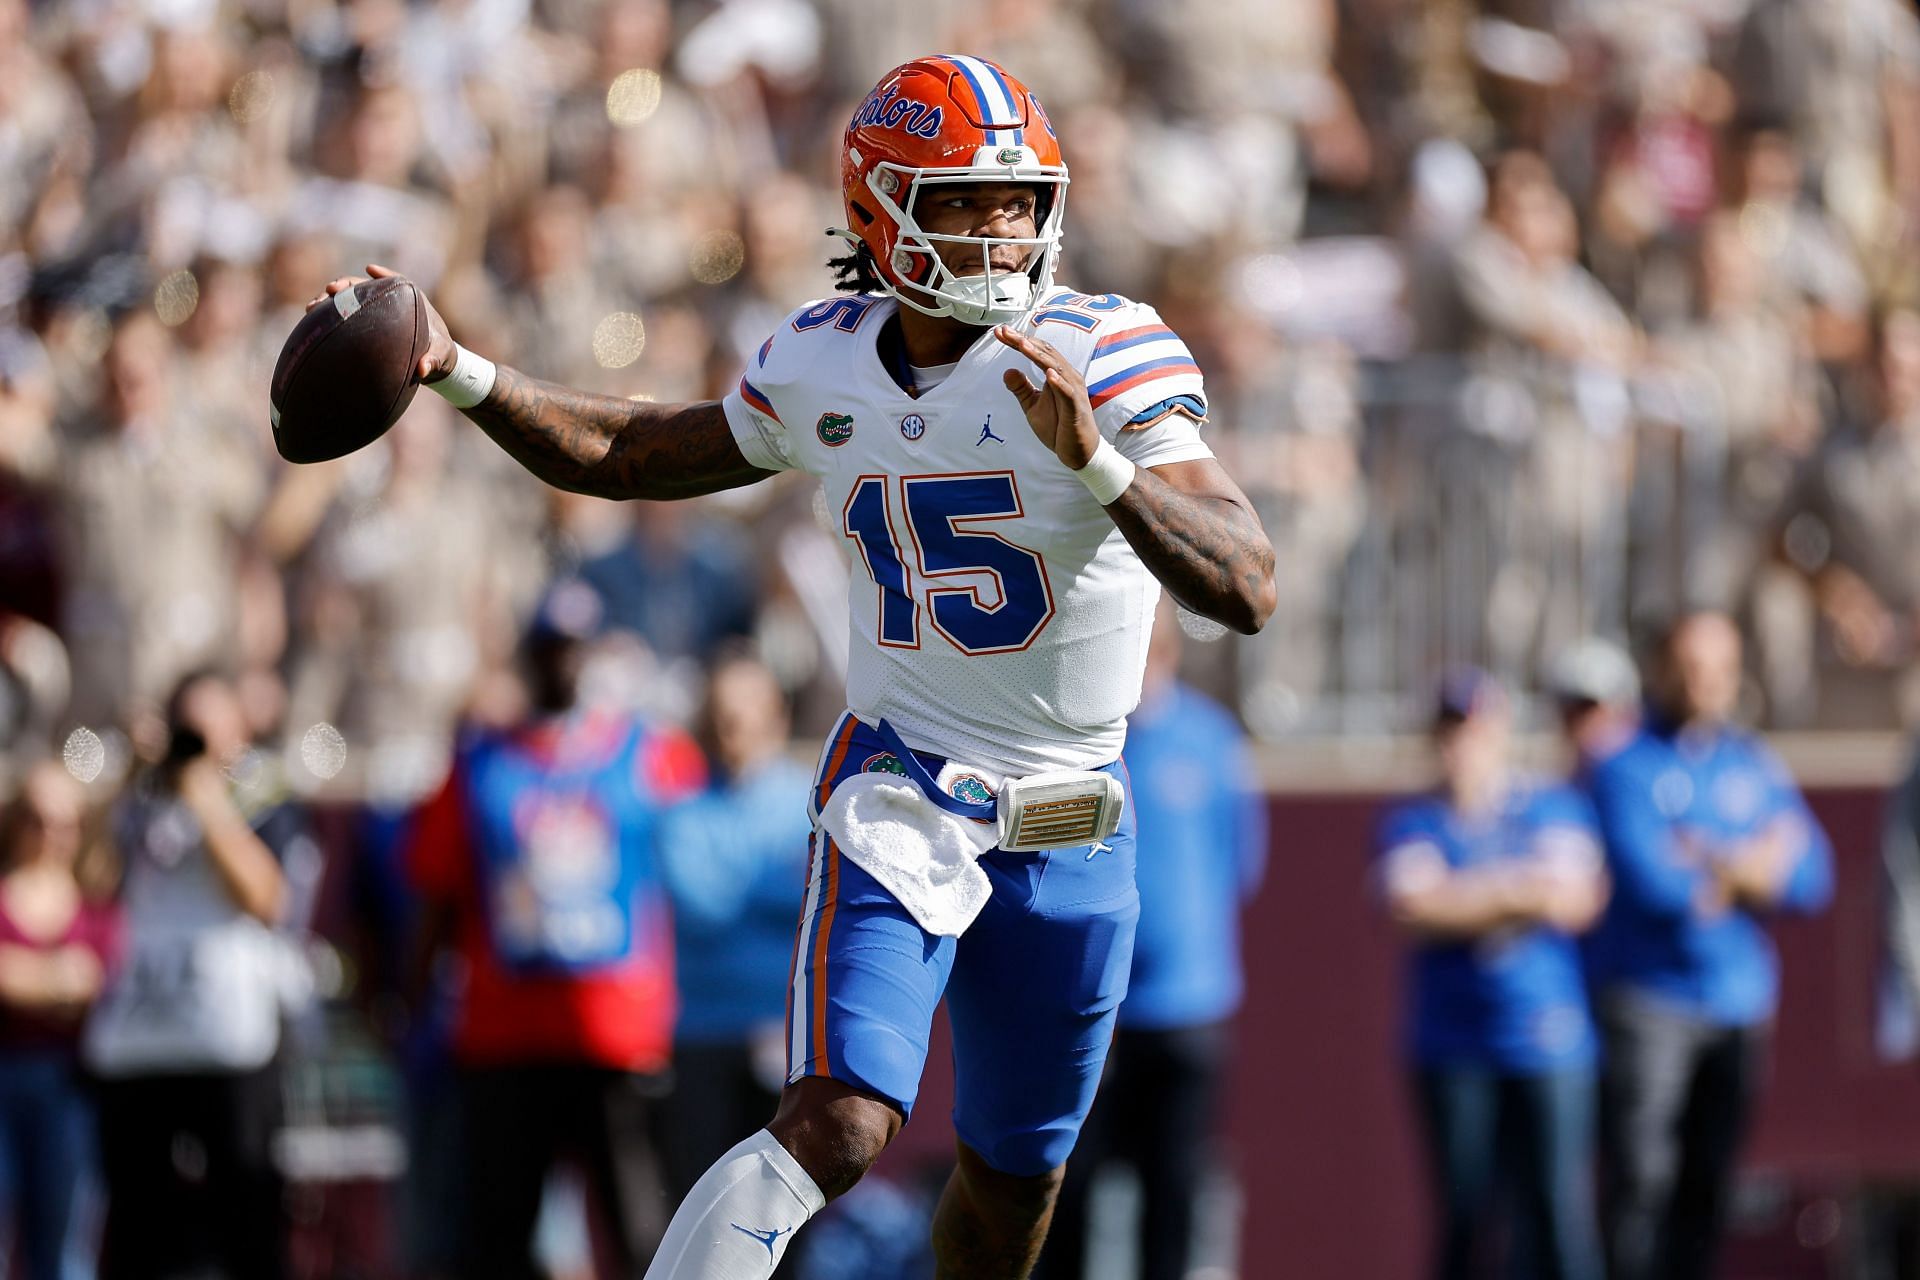 Anthony Richardson #15 of the Florida Gators looks to pass in the first quarter against the Texas A&amp;M Aggies